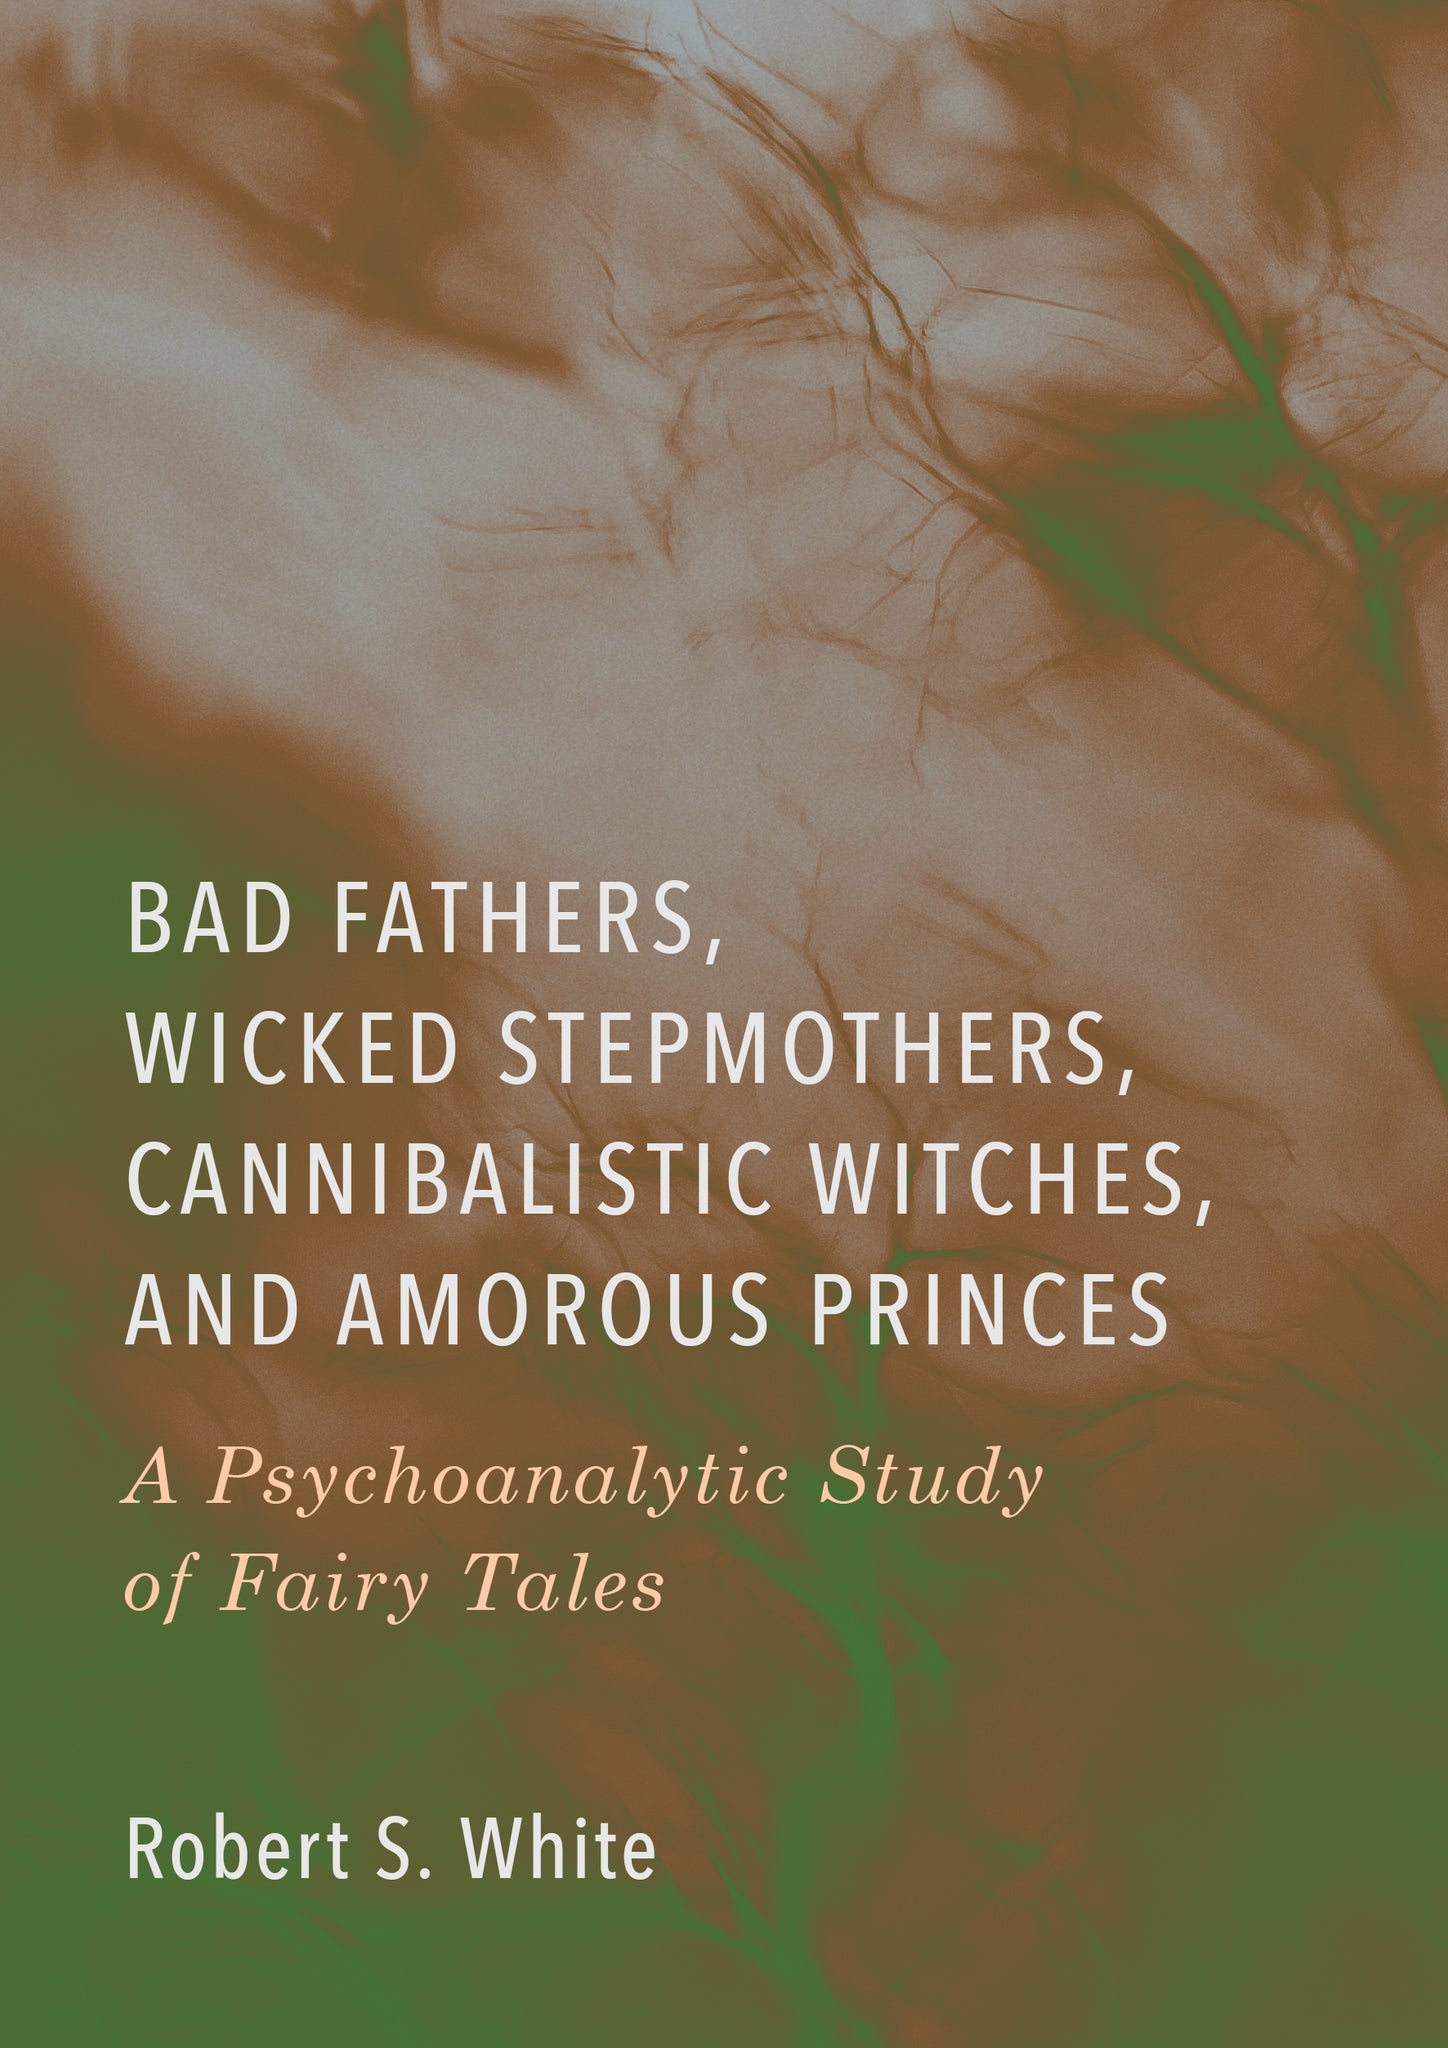 Bad Fathers, Wicked Stepmothers, Cannibalistic Witches, and Amorous Princes: A Psychoanalytic Study of Fairy Tales